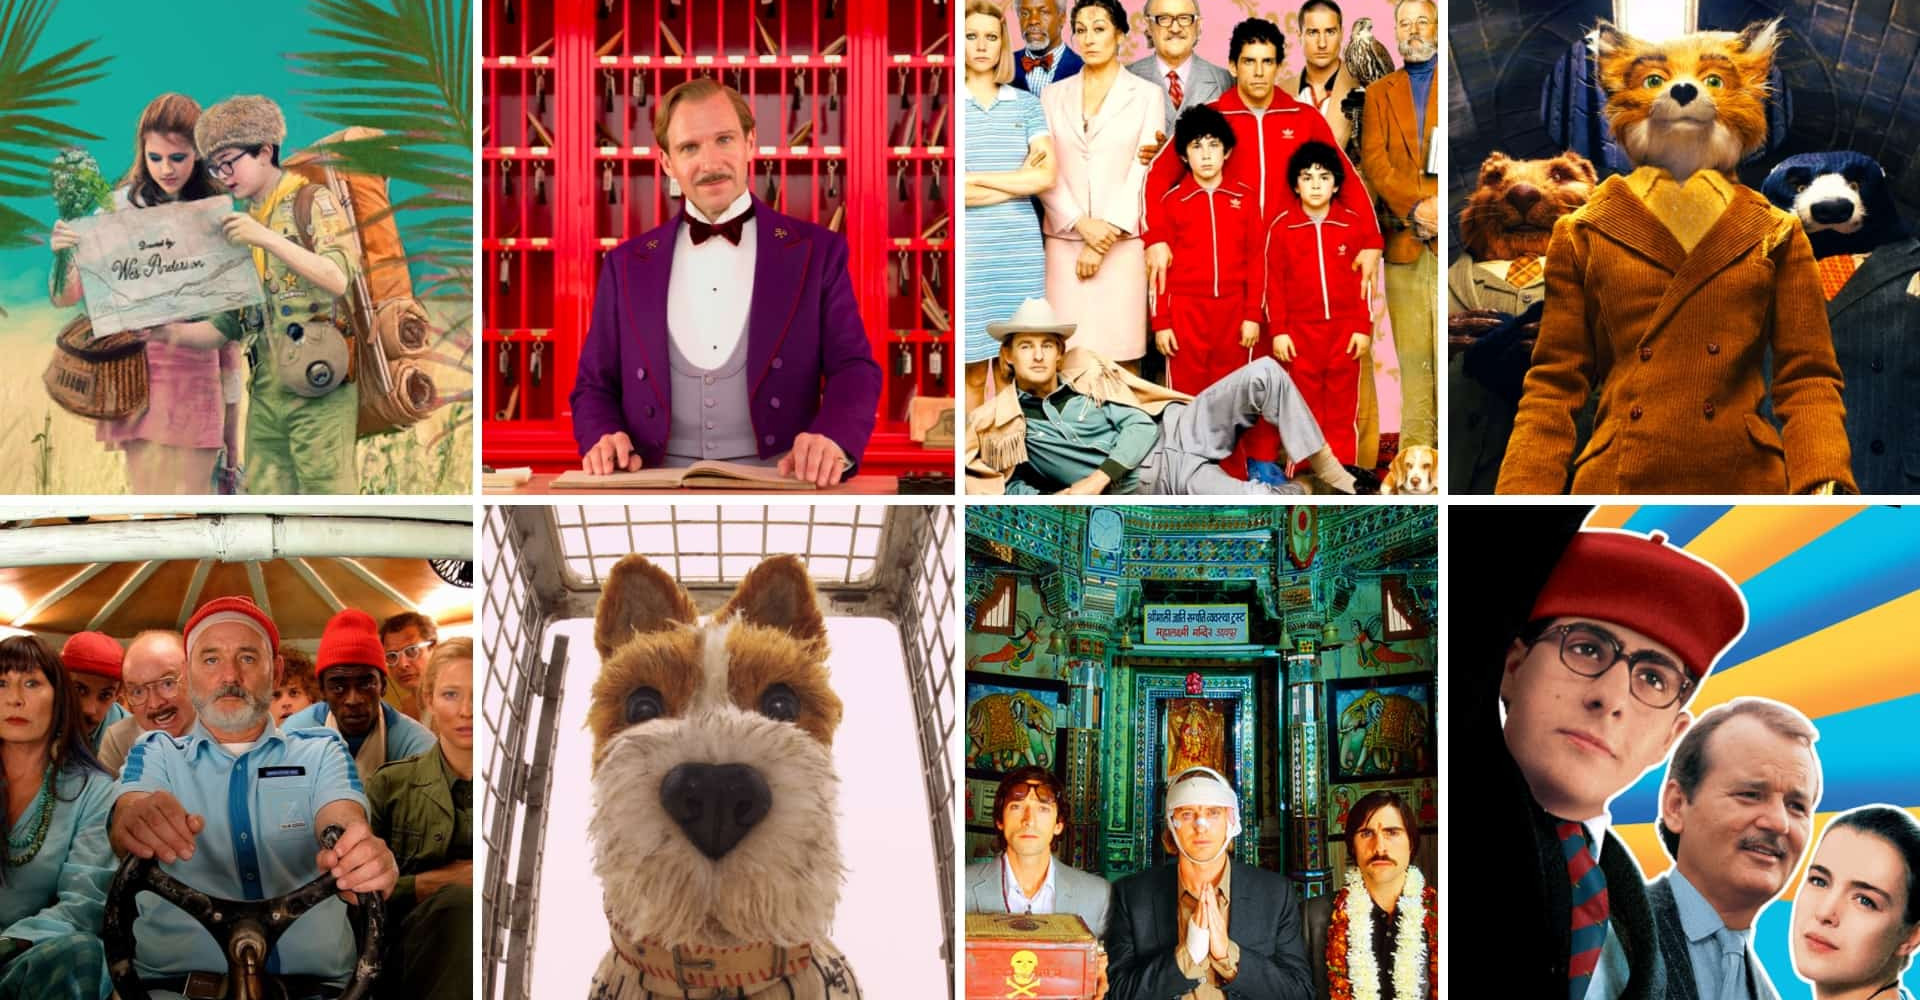 Collage of different Wes Anderson films